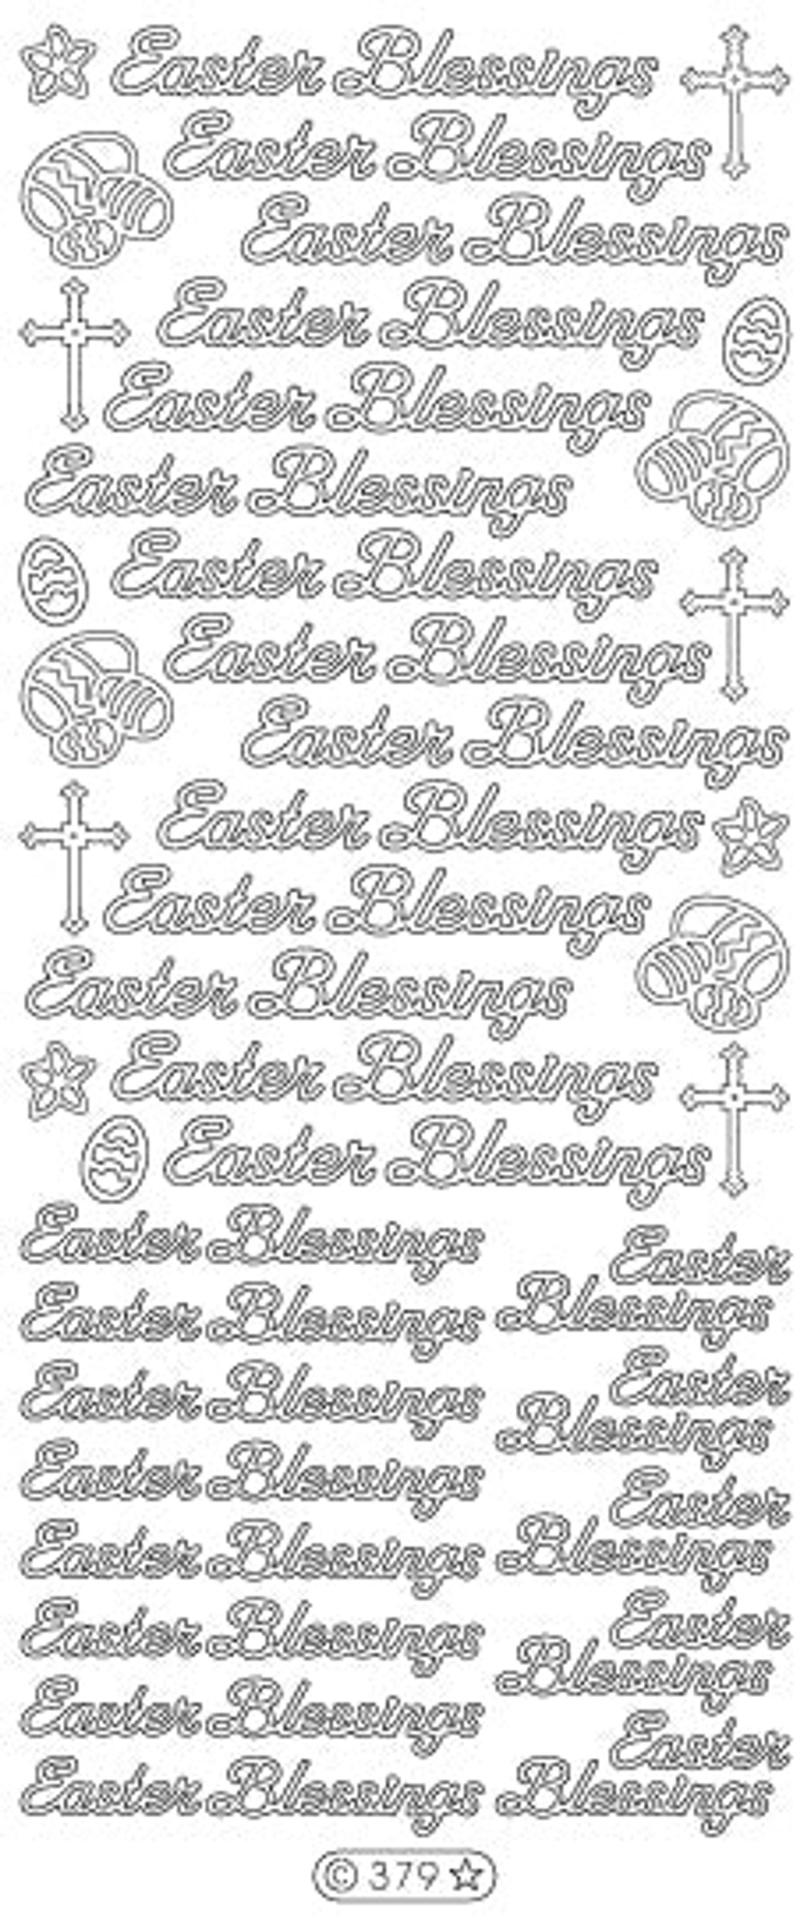 Deco Stickers - Deco Stickers Easter Blessings Silver